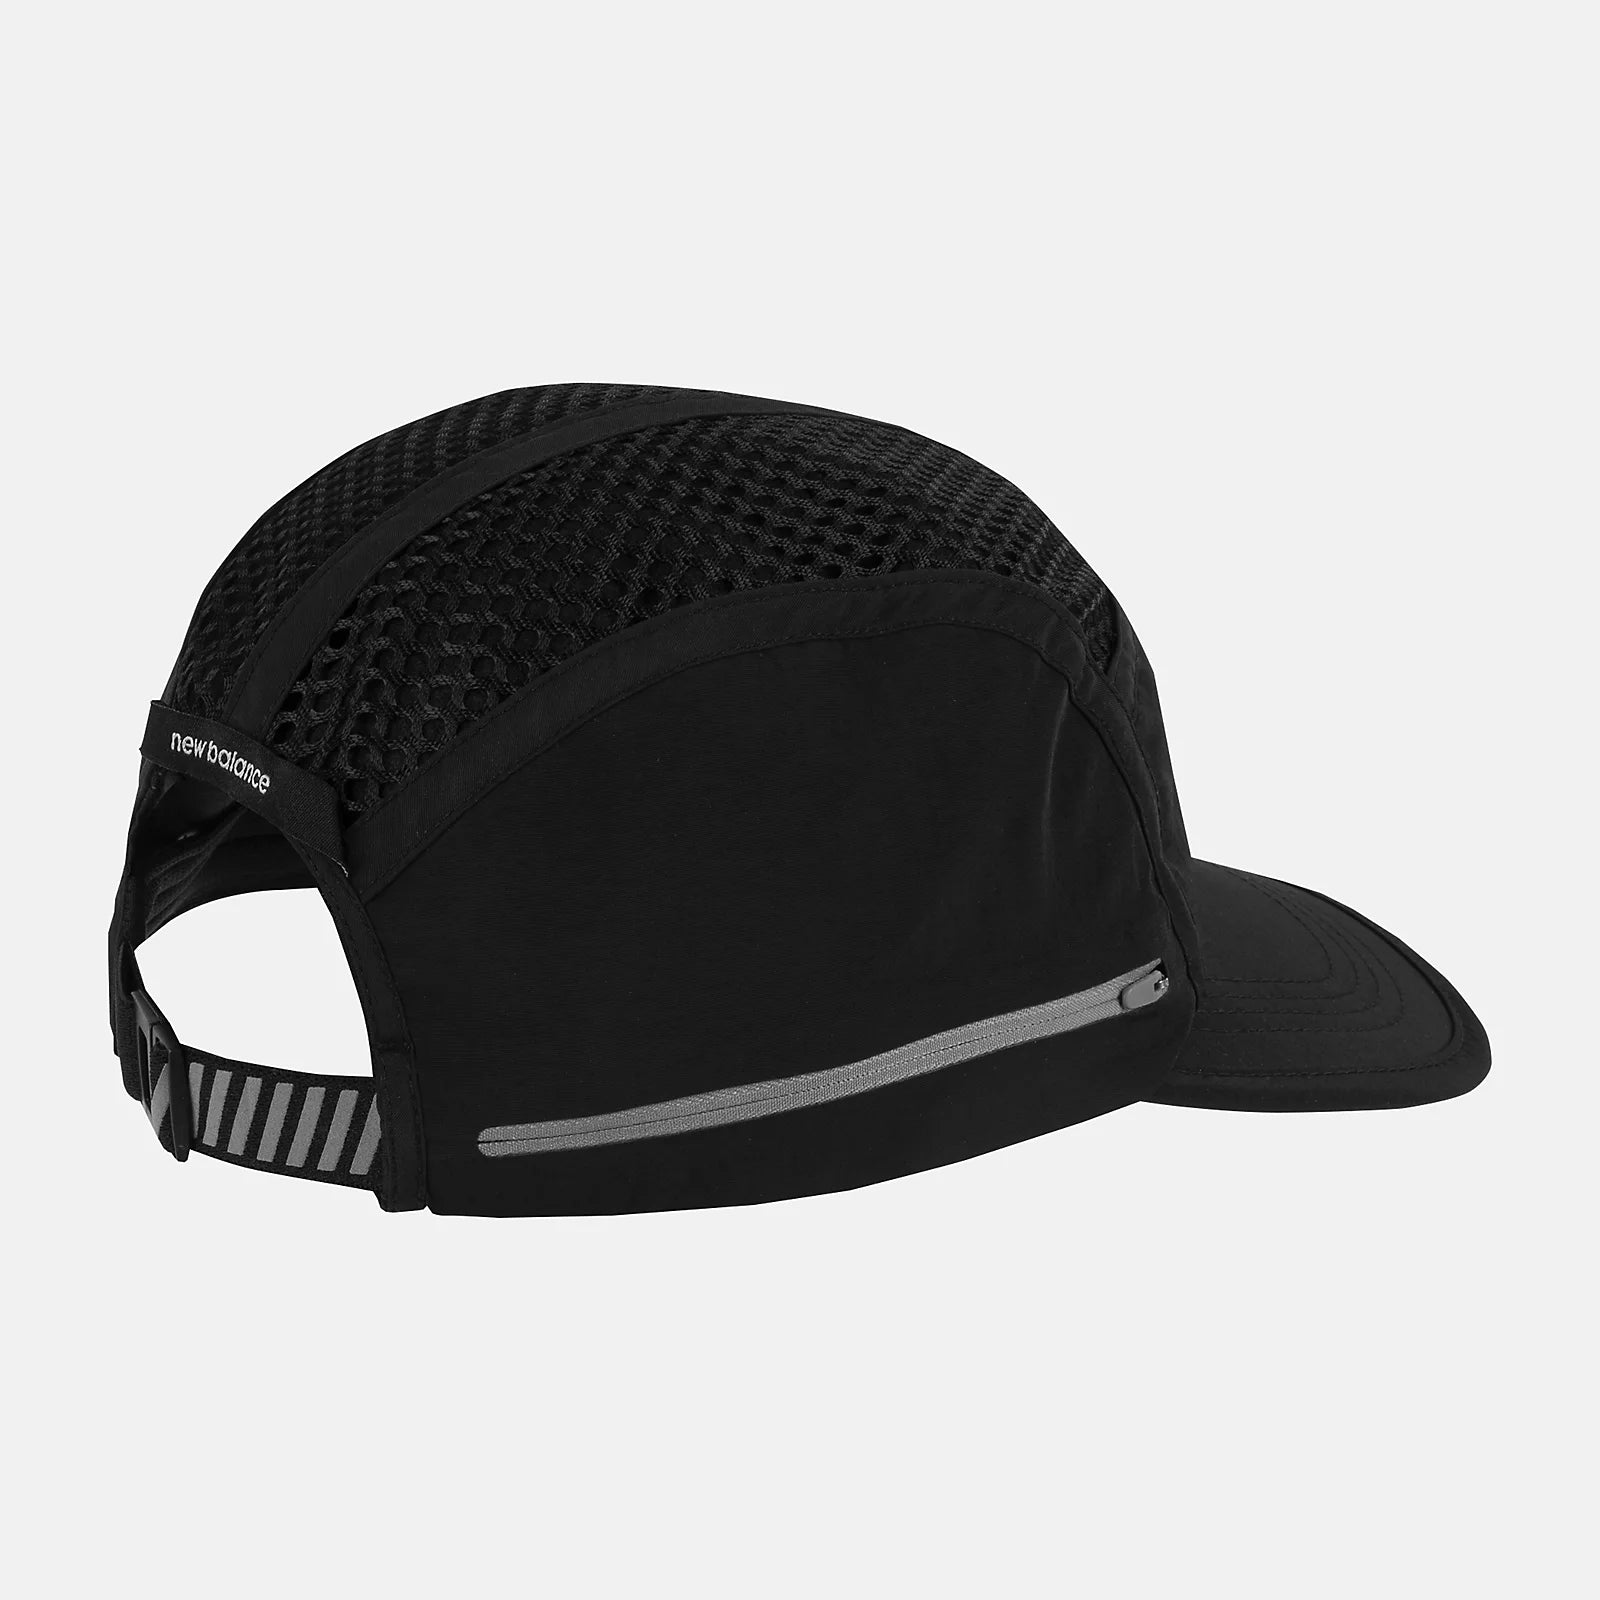 NEW BALANCE Running Stash Hat in Black LAH21001 O/S BLACK FROM EIGHTYWINGOLD - OFFICIAL BRAND PARTNER